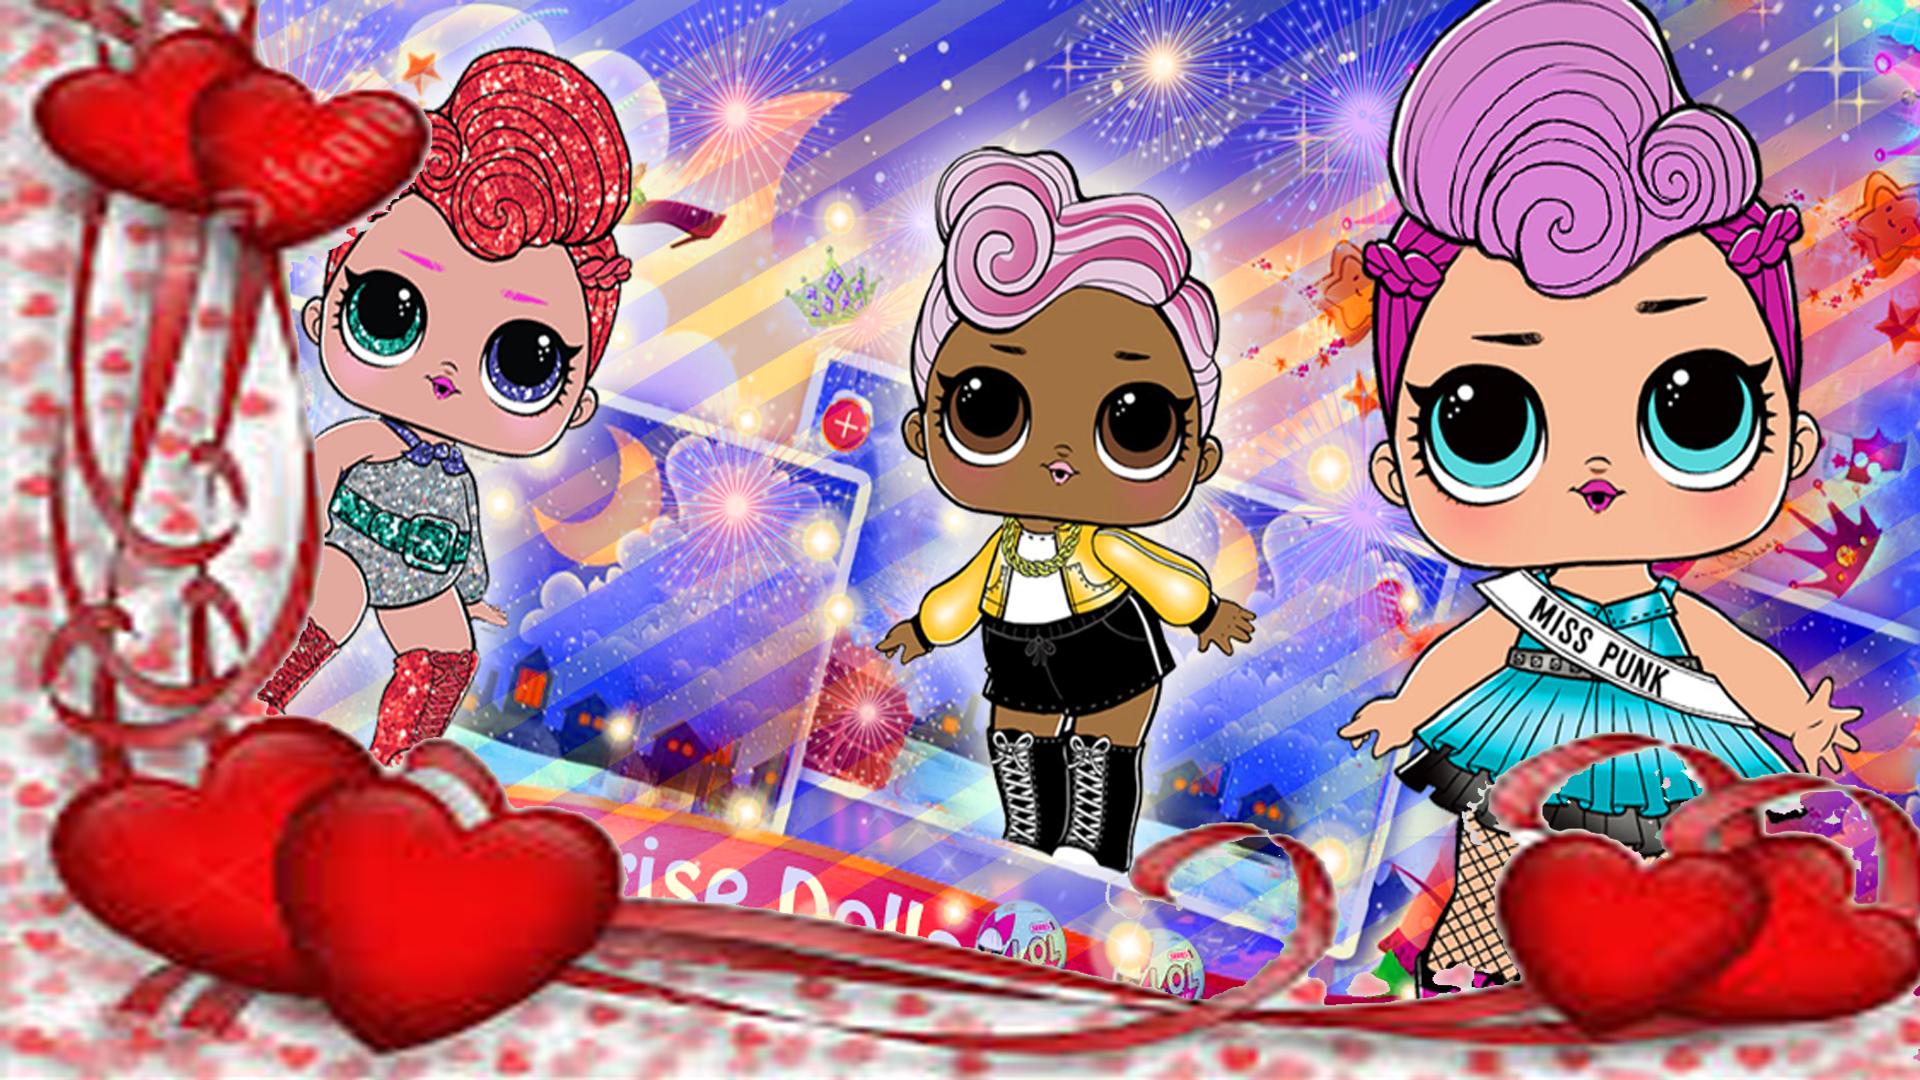 Lol Surprise Christmas Dolls: The Game adventure for Android - APK Download